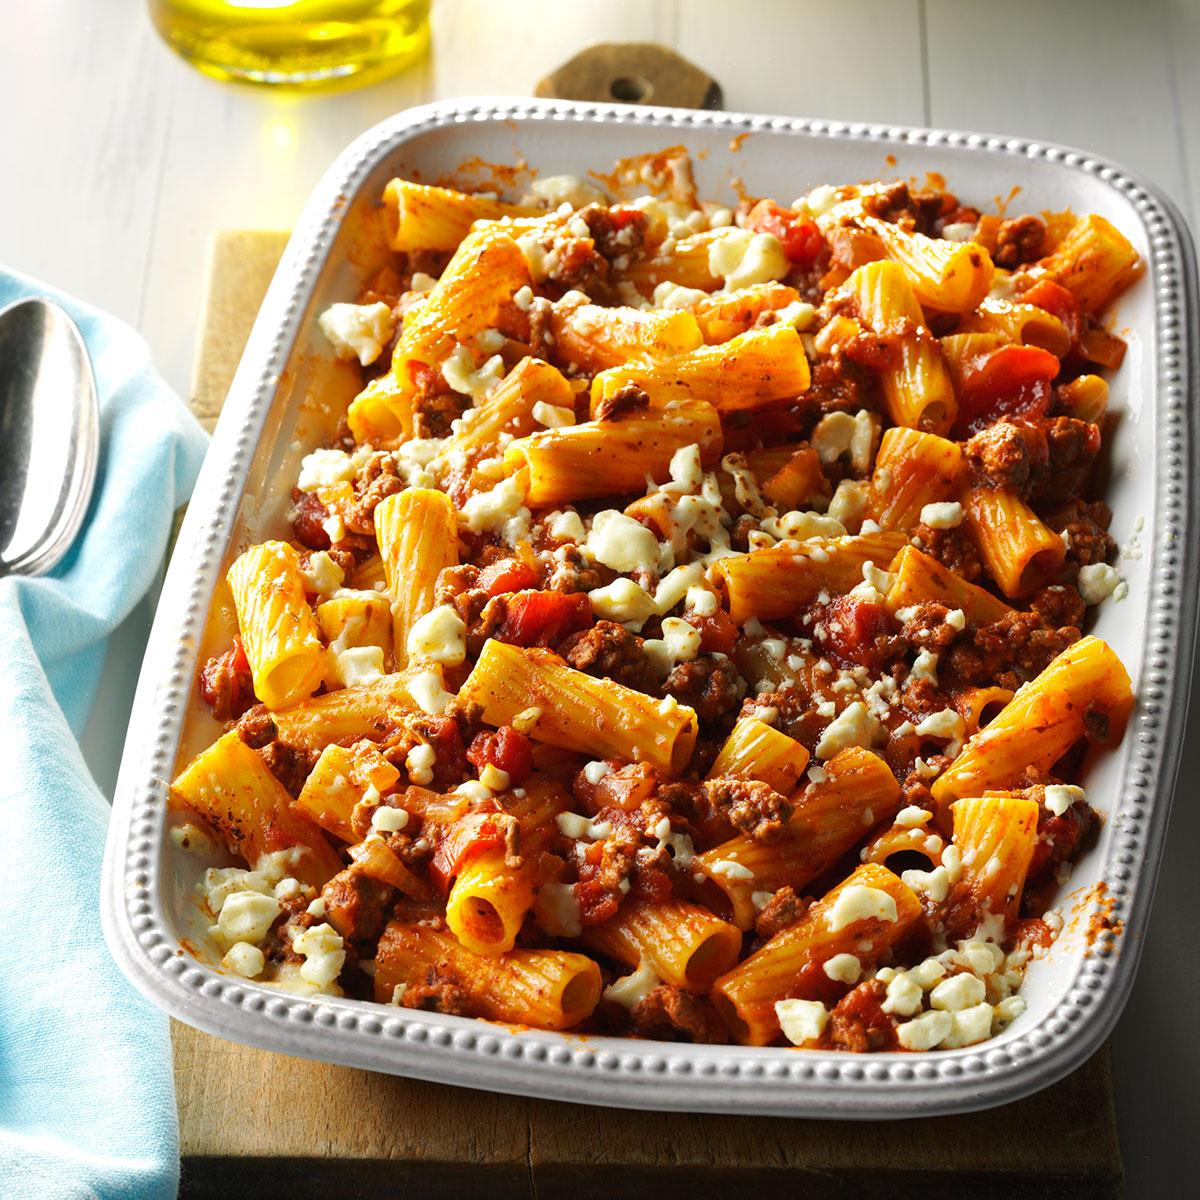 Greek pasta bake. Penne, ground meat, feta, other ingredients in red sauce in a casserole dish